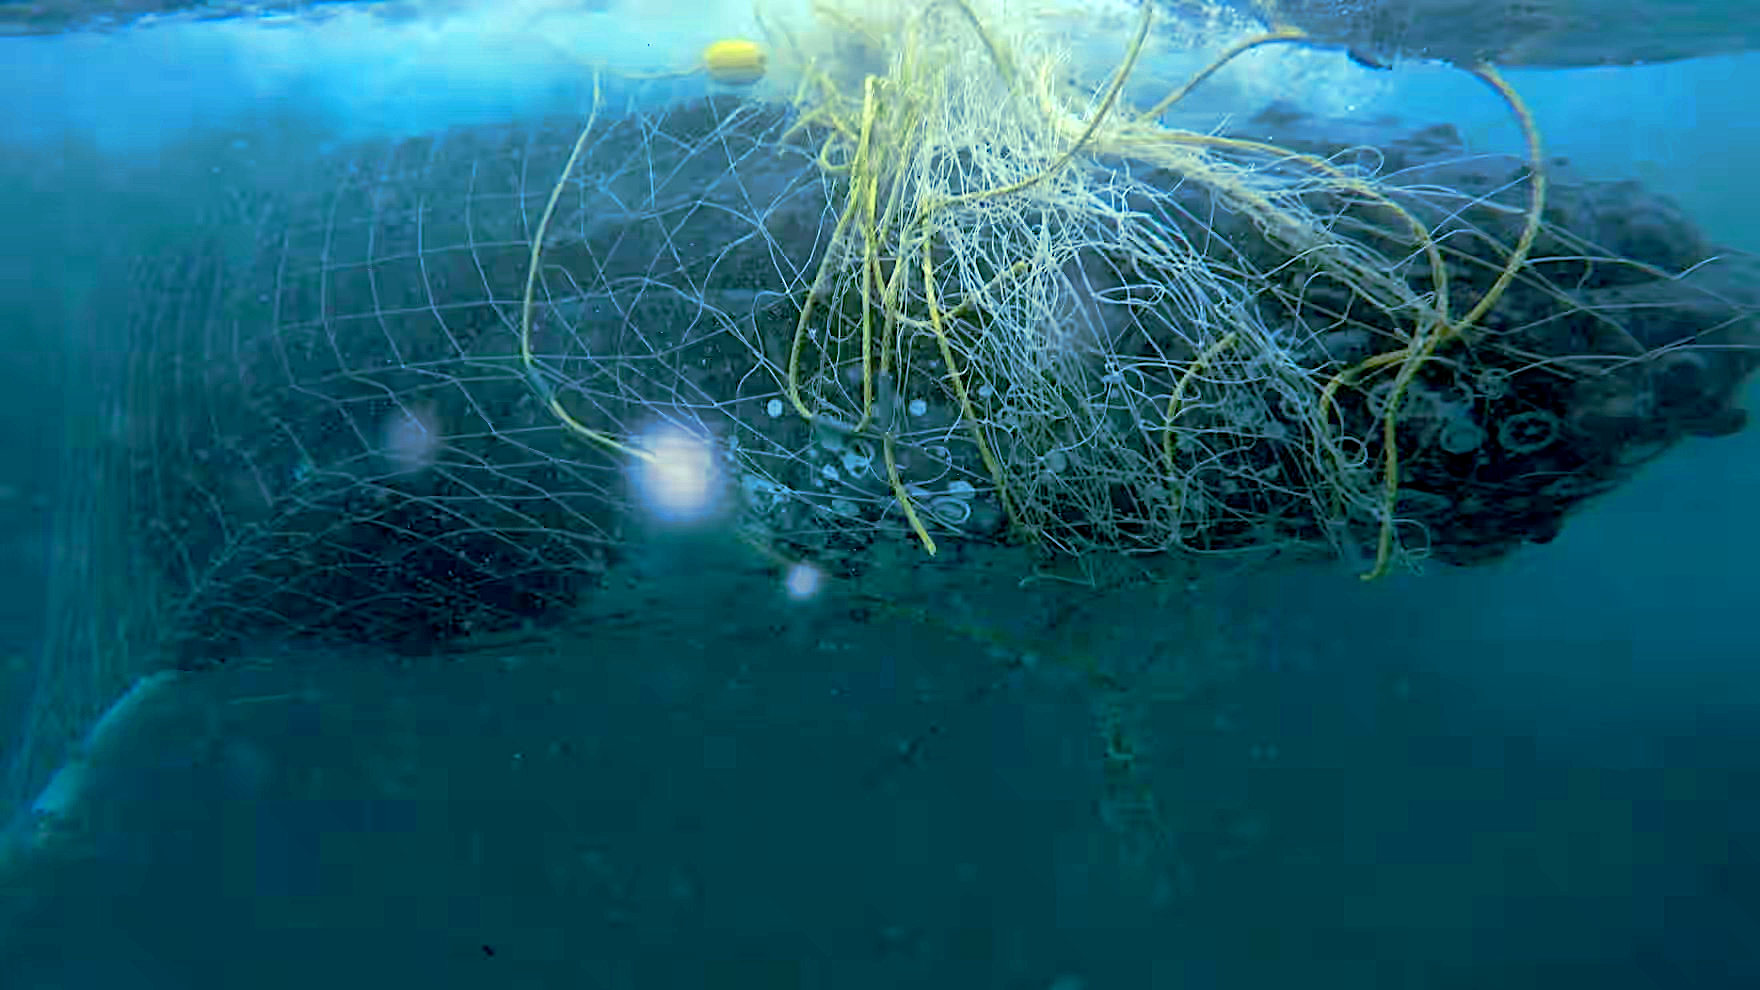 A baby humpback whale calf trapped in ghost fishing gear